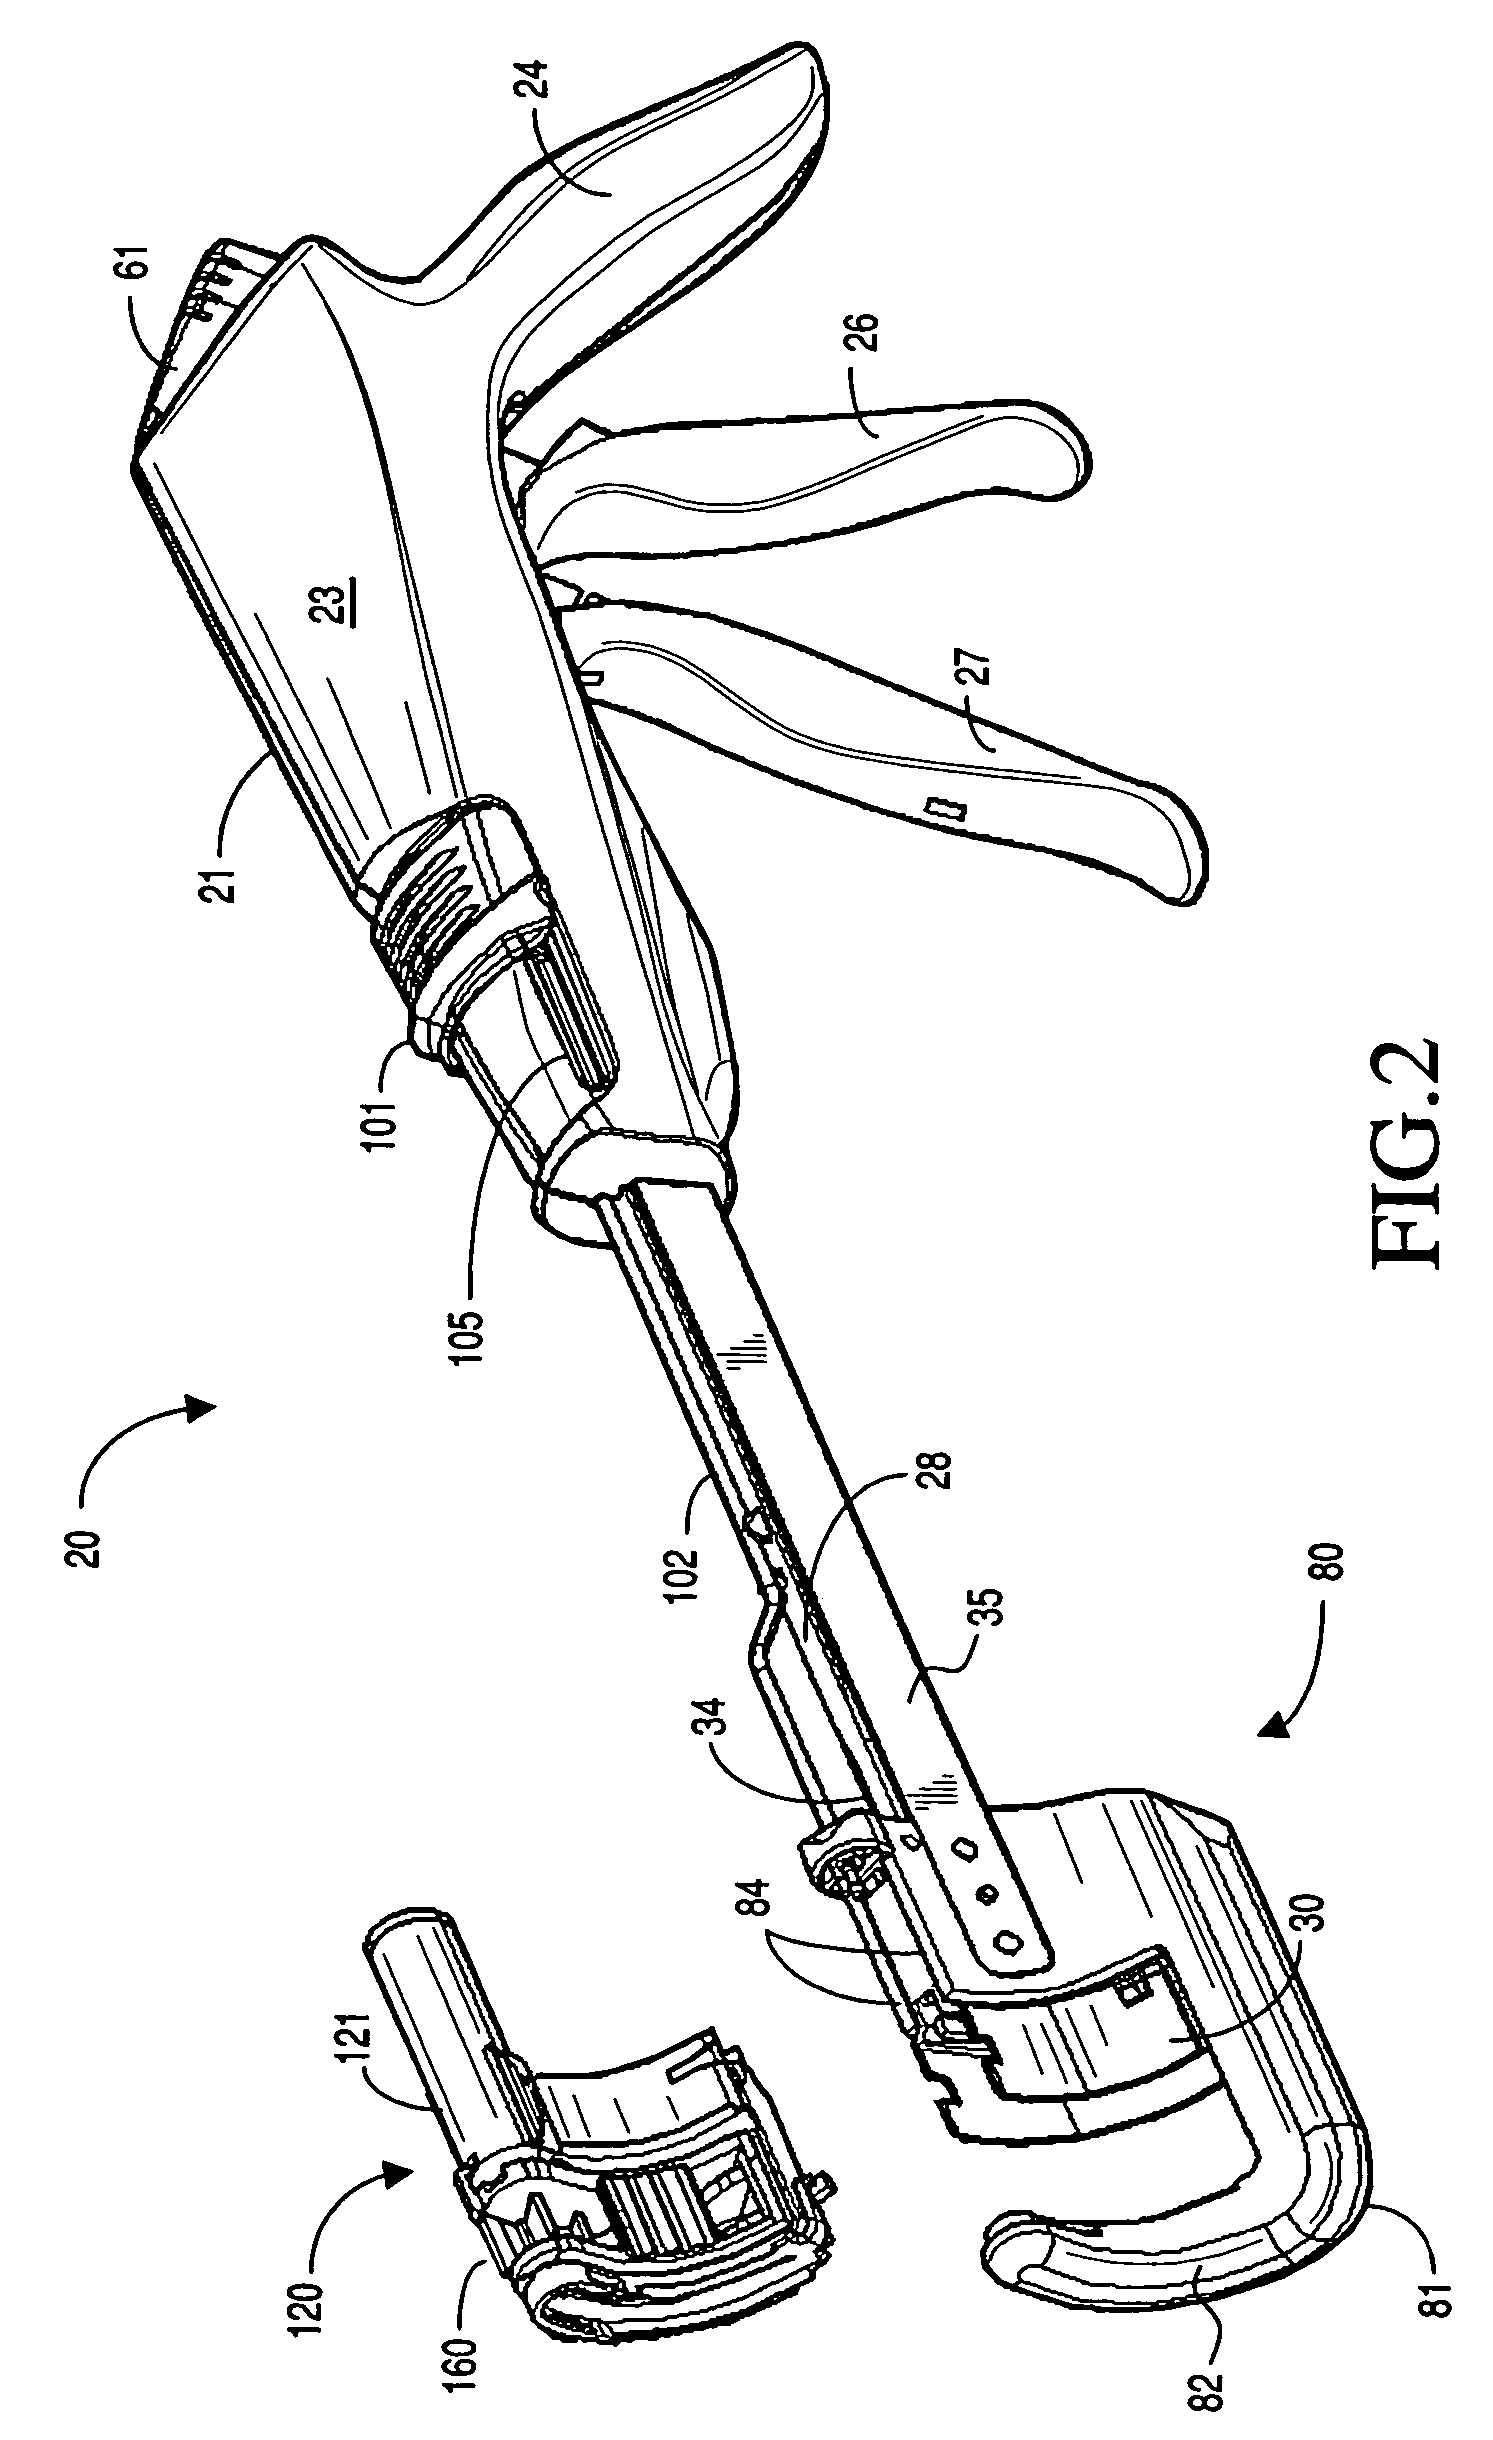 Cartridge with locking knife for a curved cutter stapler